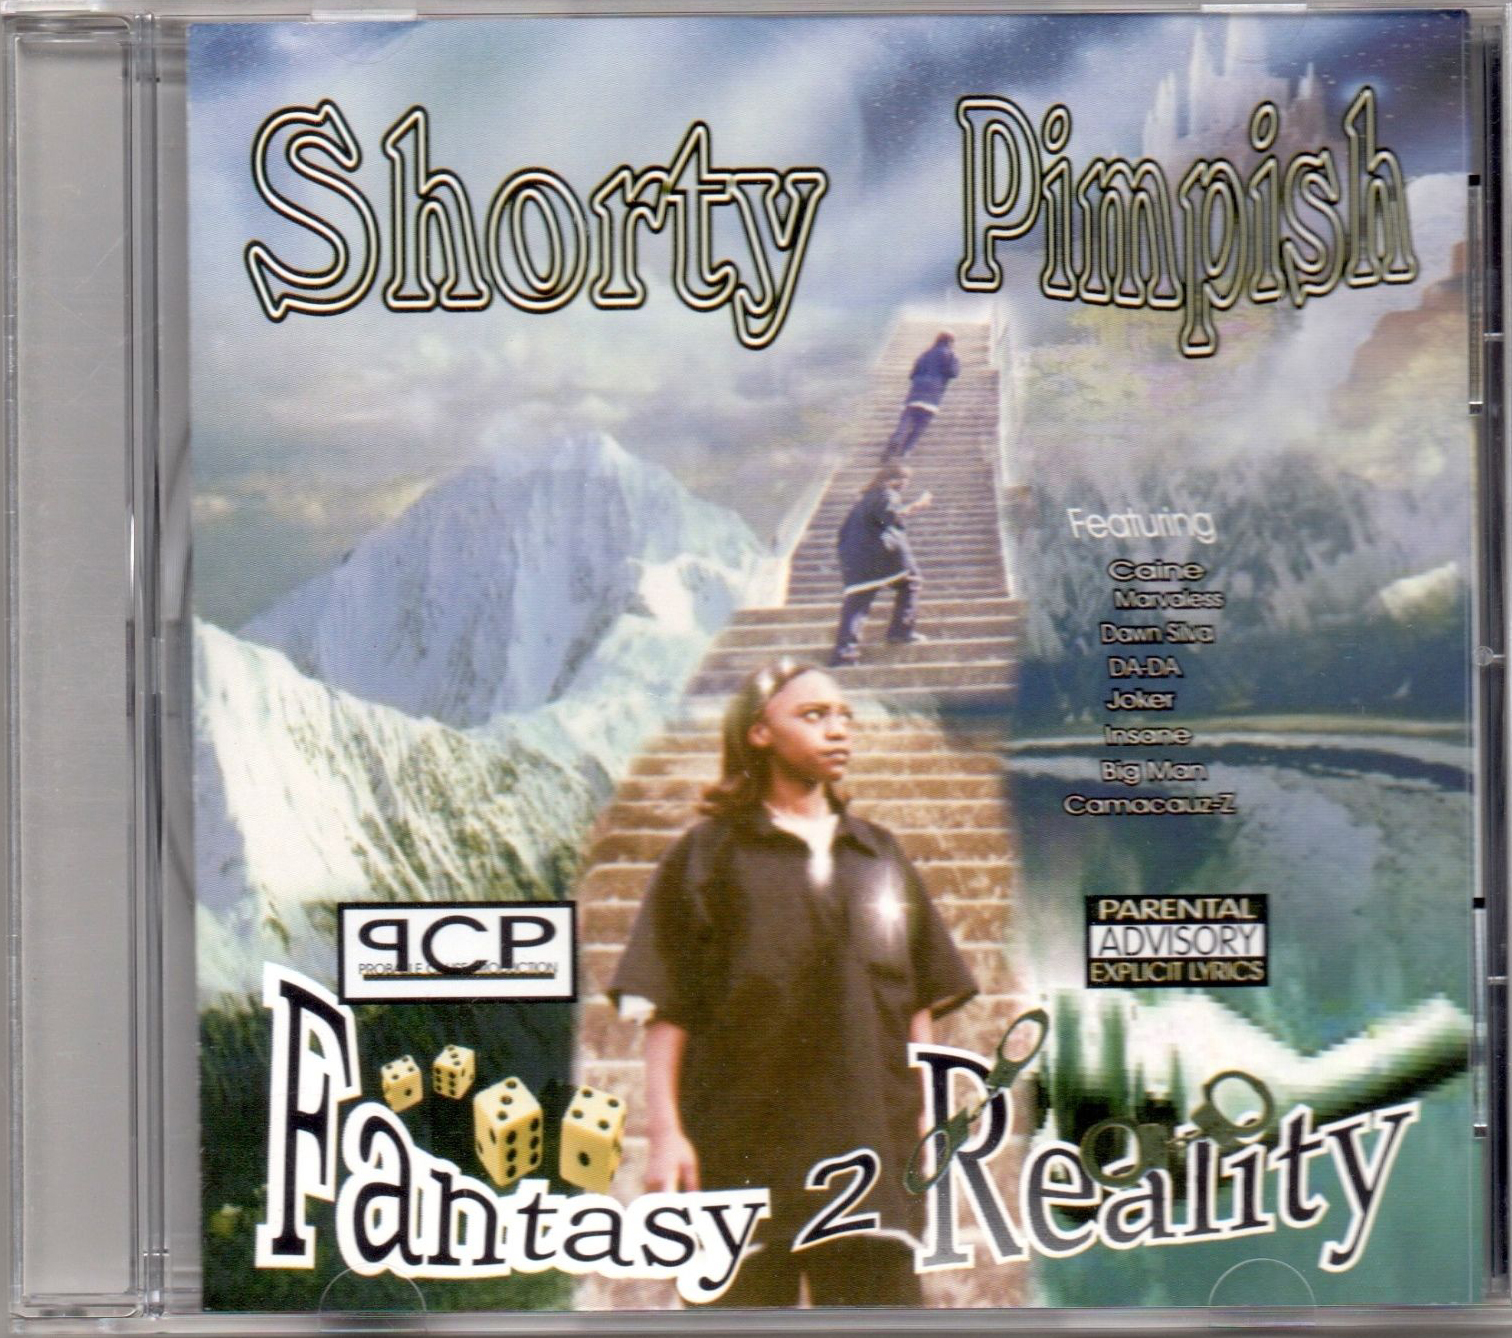 Fantasy 2 Reality by Shorty Pimpish (CD 2002 Probable Cause 